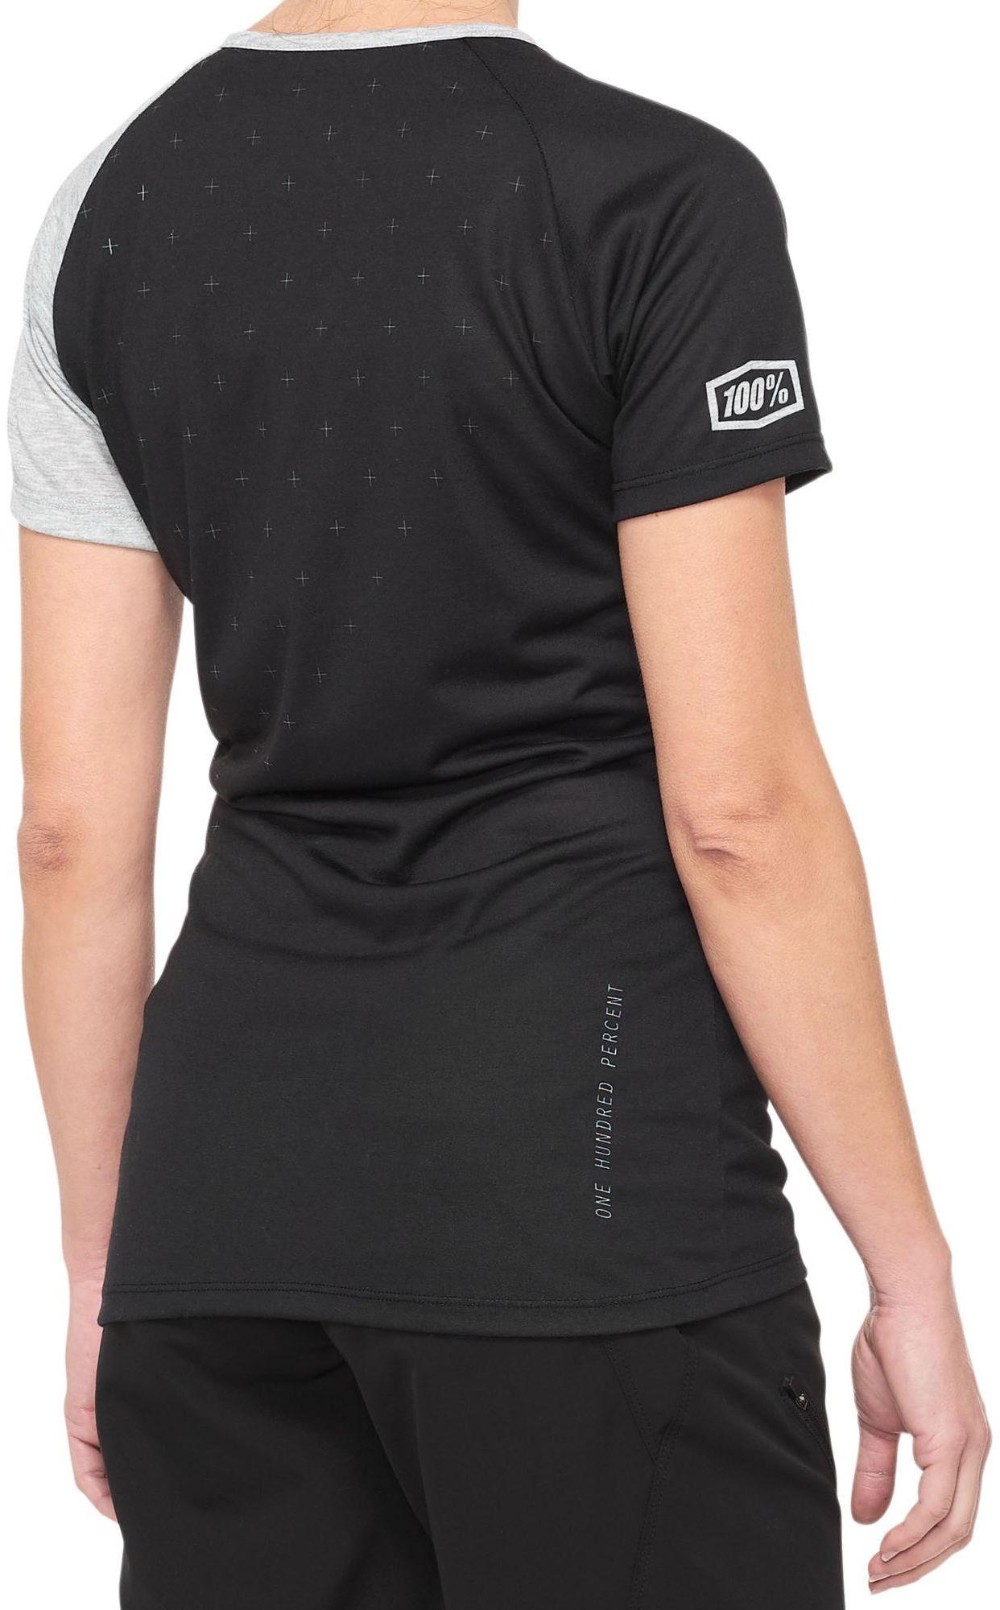 Airmatic Womens Short Sleeve Jersey image 1